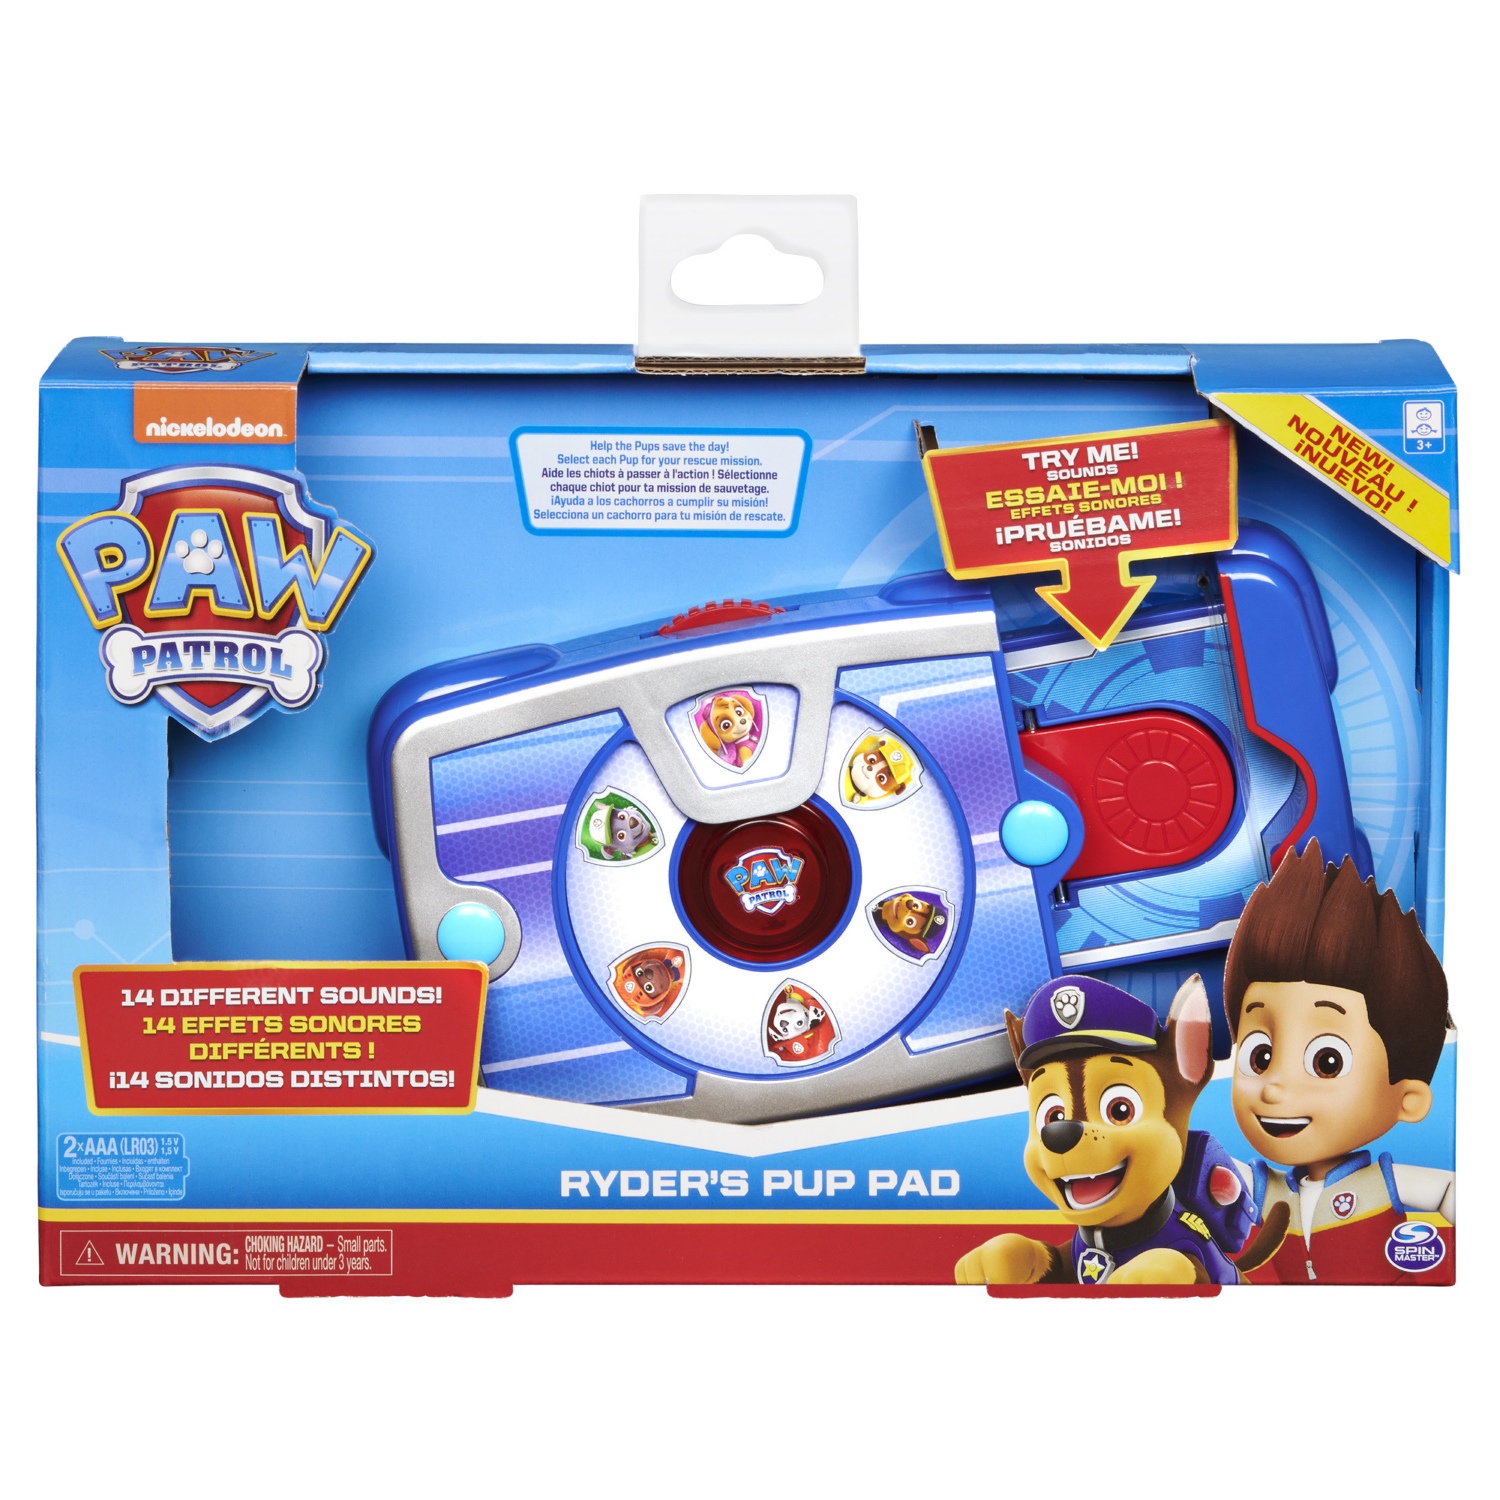 PAW PATROL ROLE PLAY RYDER'S PUP PAD